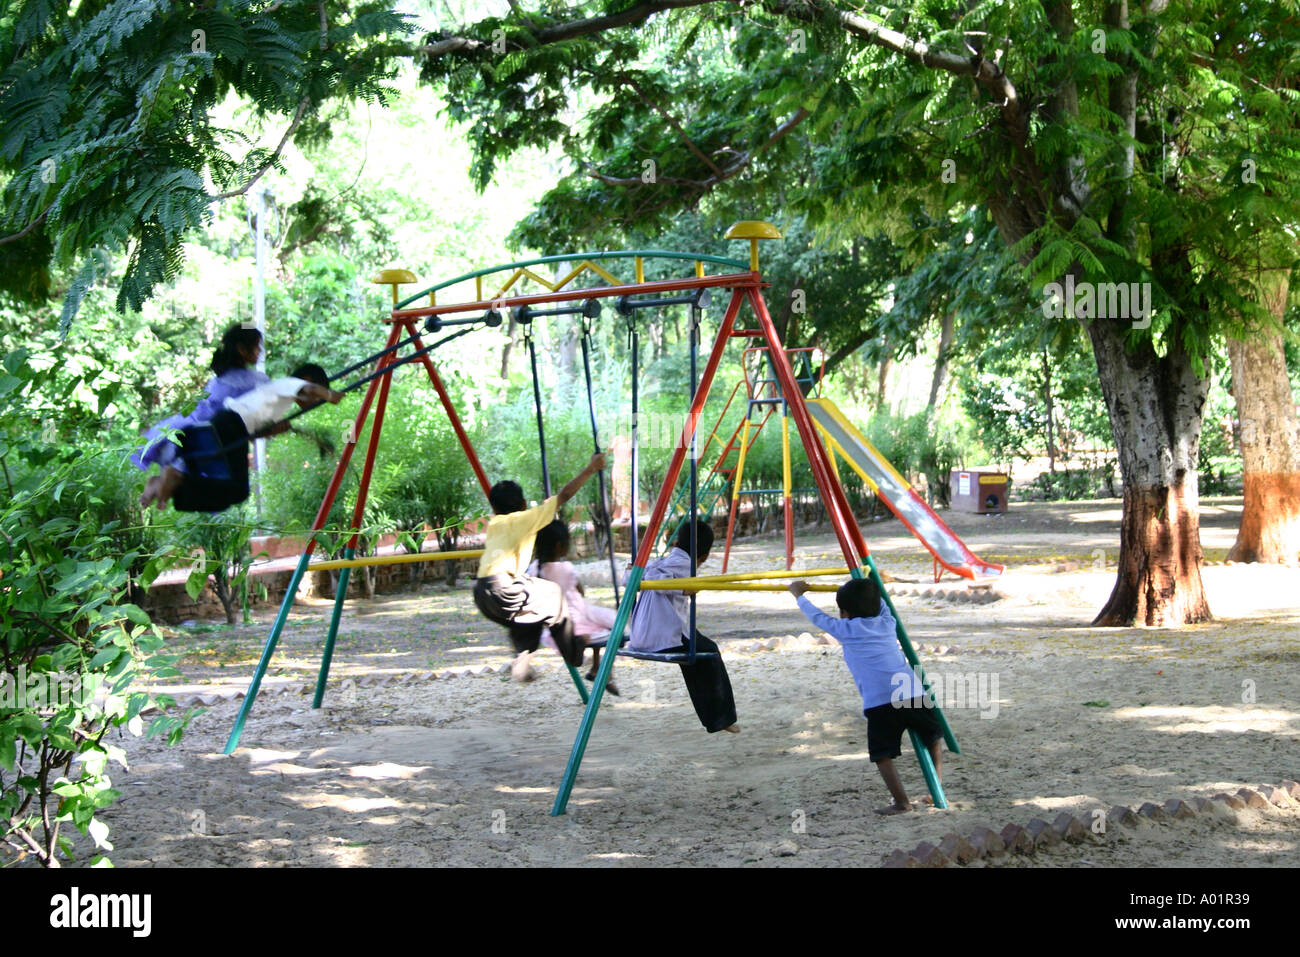 Children boys and girls playing and enjoying on swings in a park at Gandhi Dham in Gujarat India Stock Photo